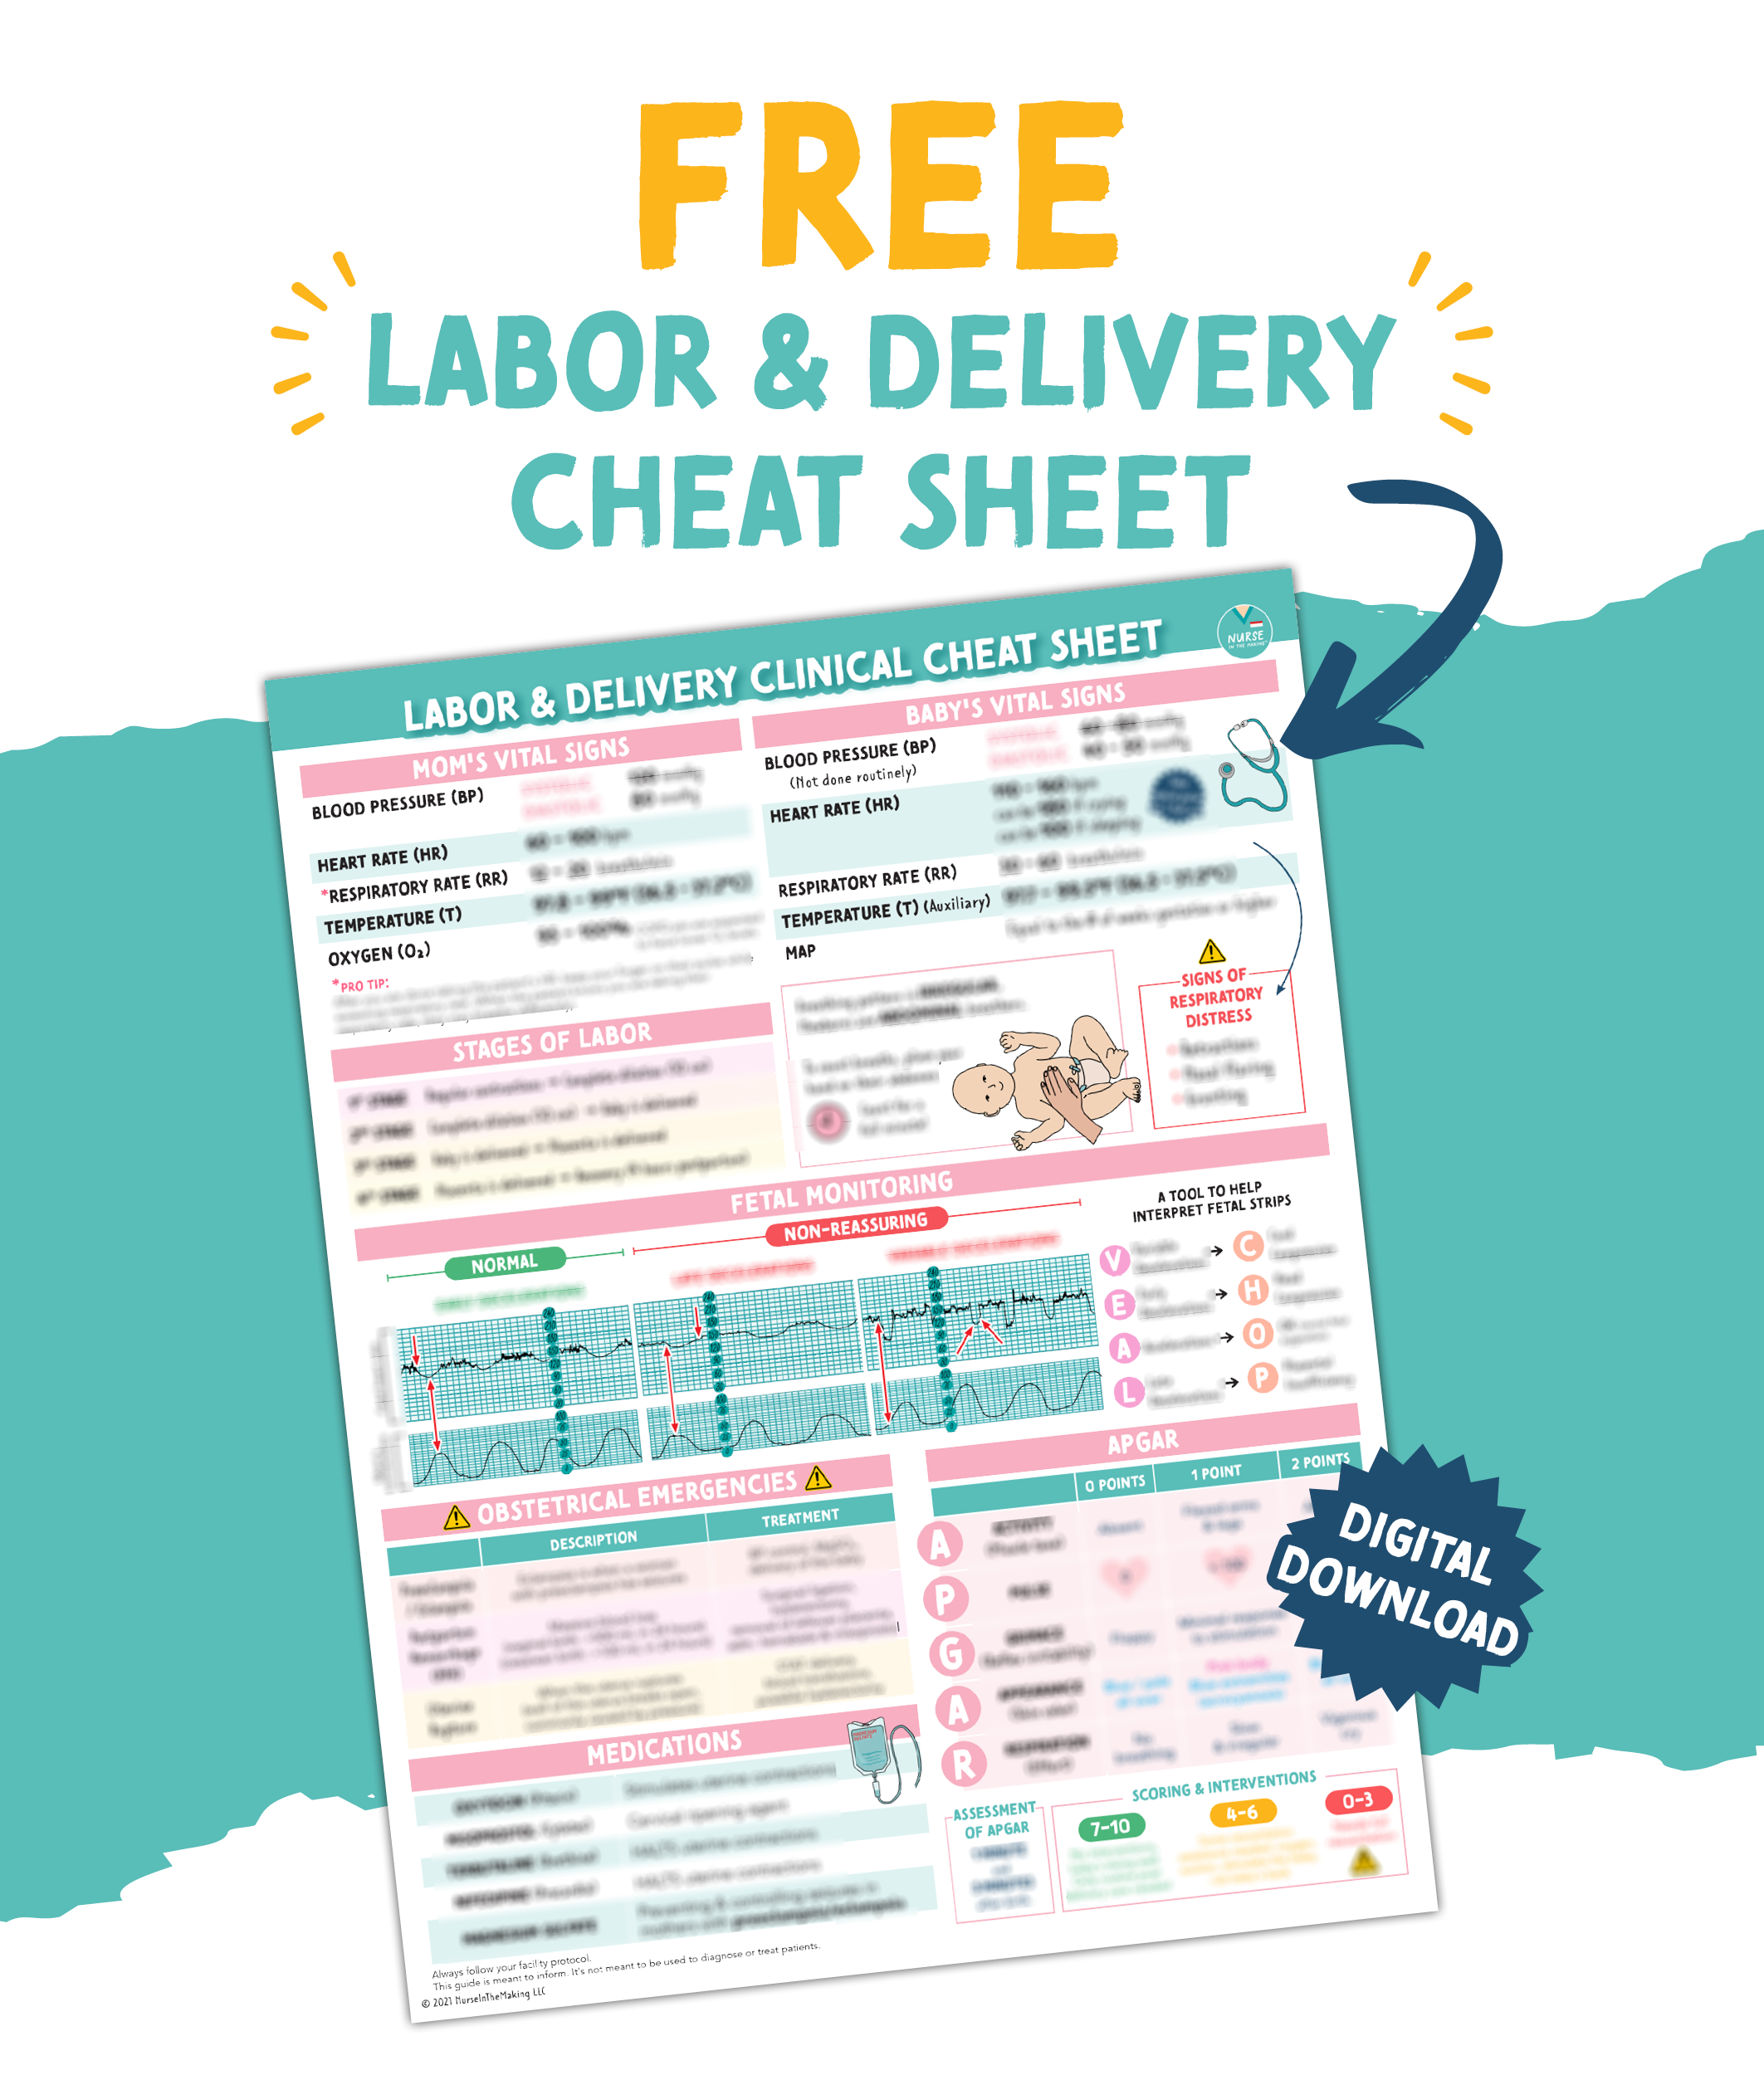 Free labor and delivery cheat sheet (NurseInTheMaking)